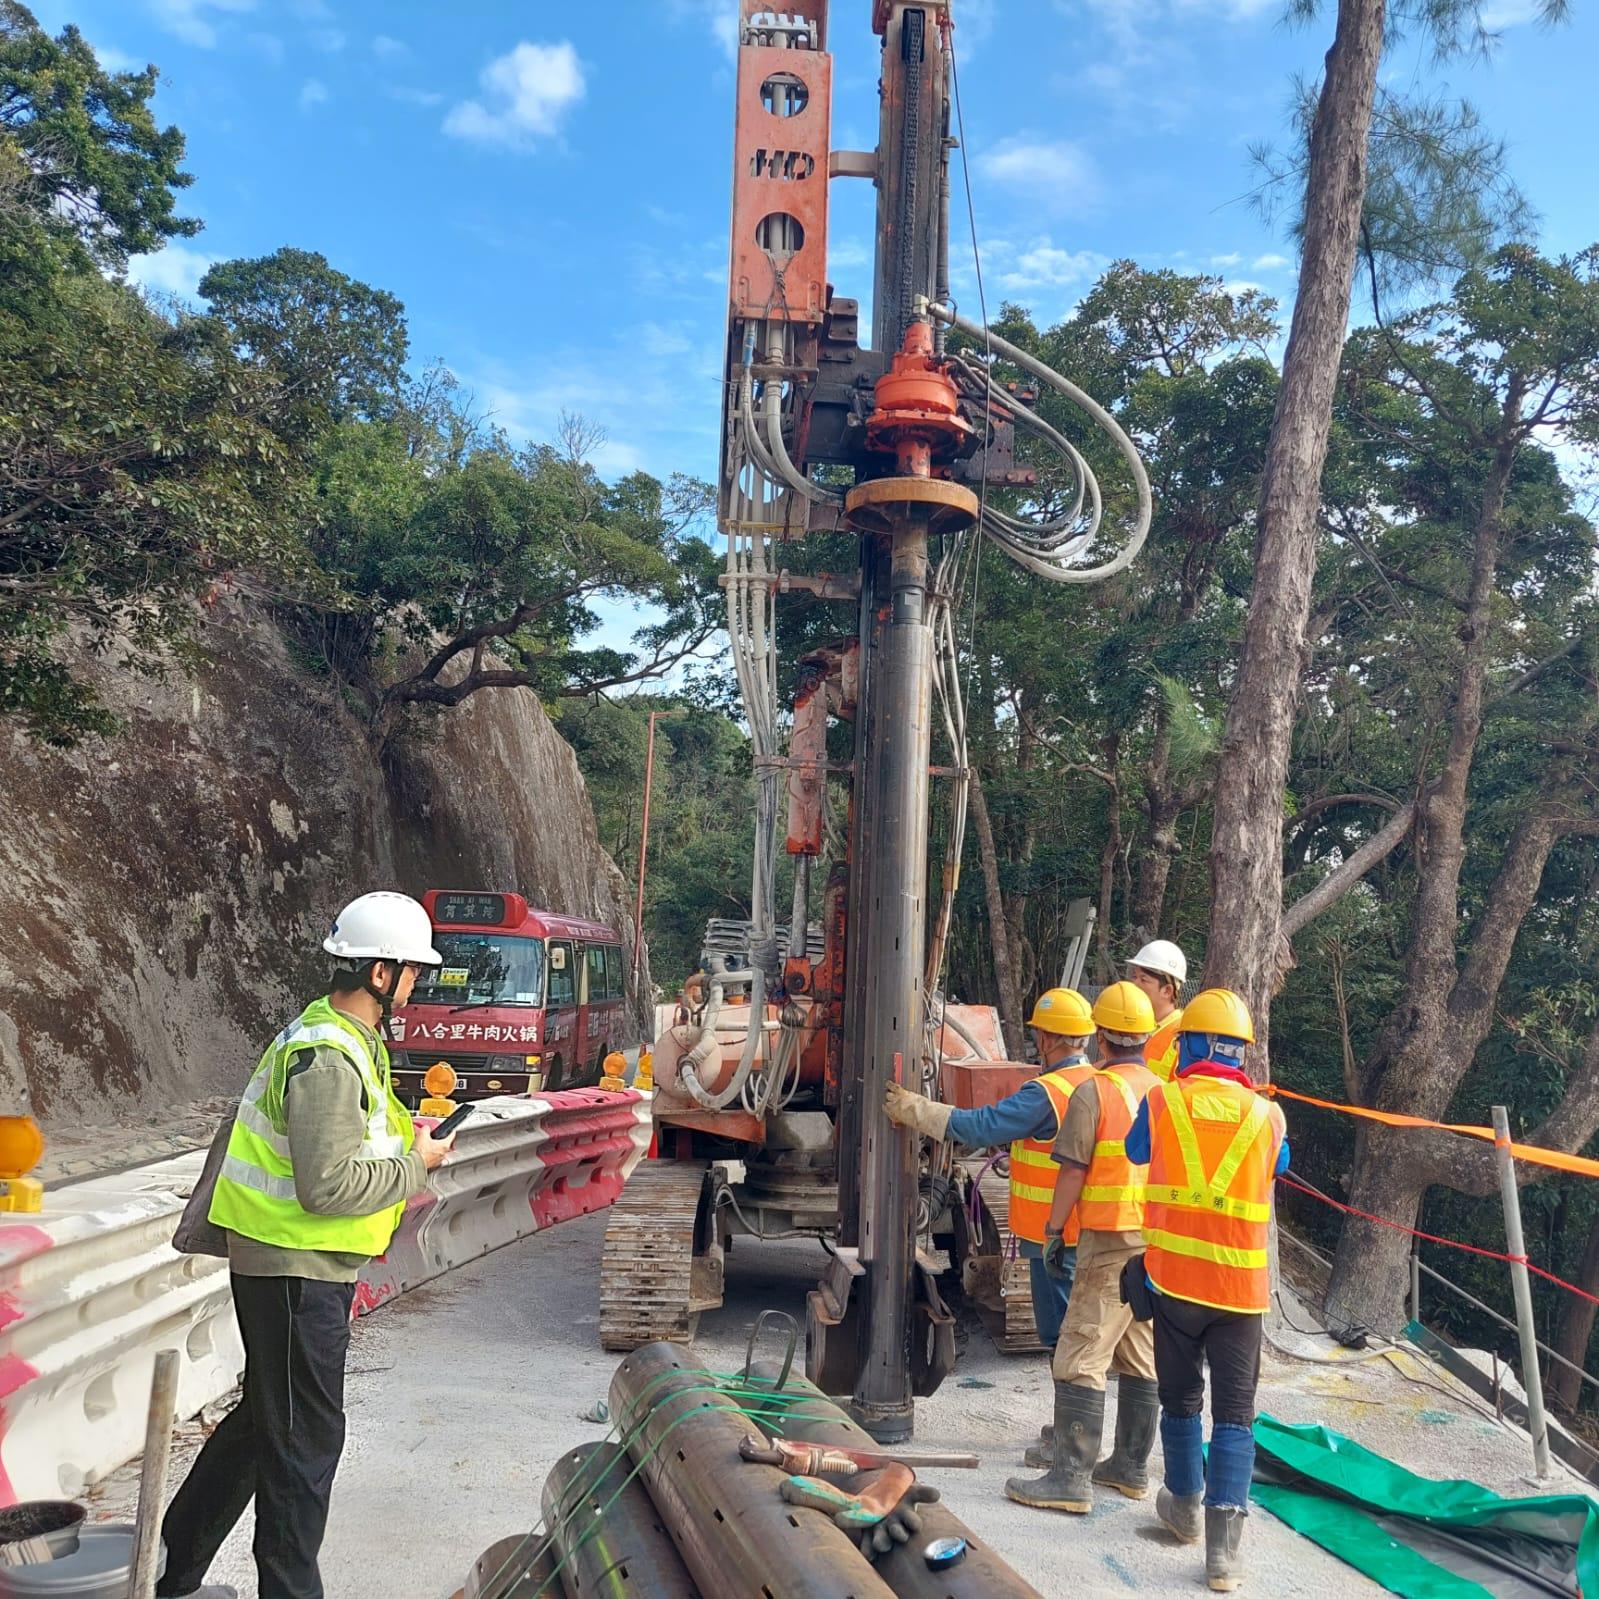 The two-lane traffic arrangement at Shek O Road near Lan Nai Wan was fully resumed today (February 29) in the afternoon. Photo shows the mini pile drilling and grouting works earlier at the scene, which formed part of the emergency slope stabilisation works necessary for reopening the relevant traffic lane.